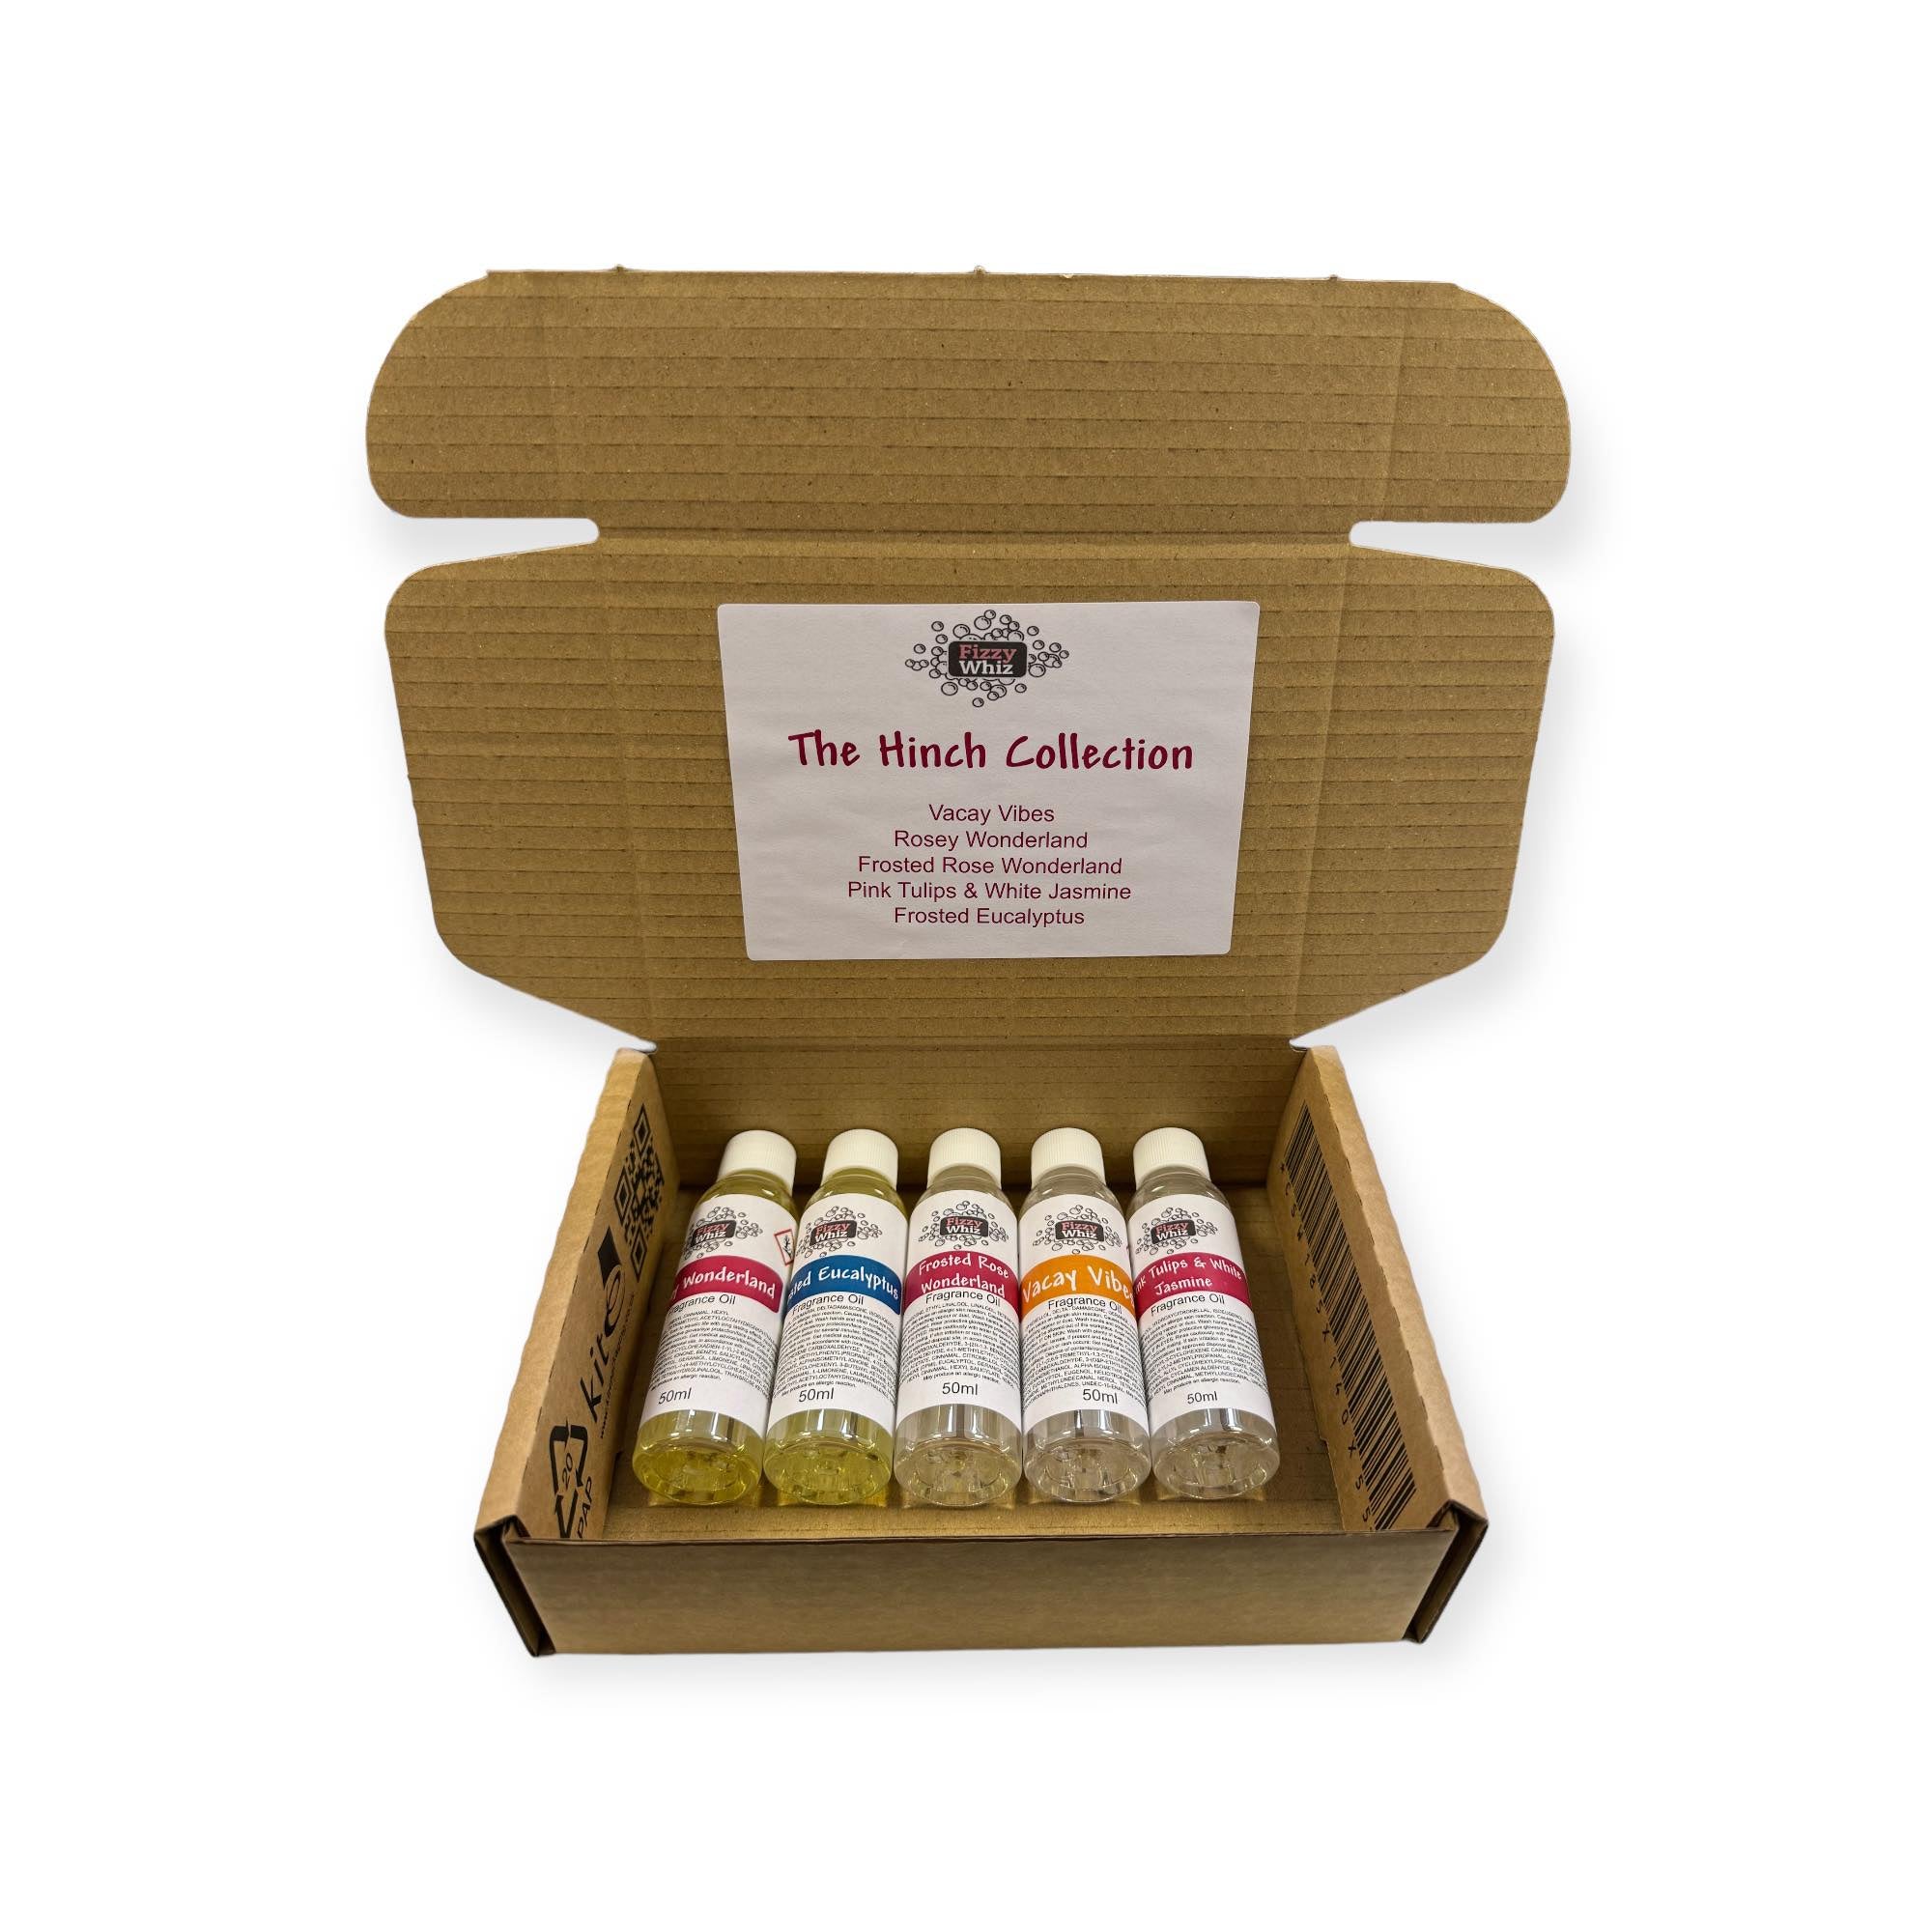 The Hinch Bundle Fragrance Oil Box Set Collection